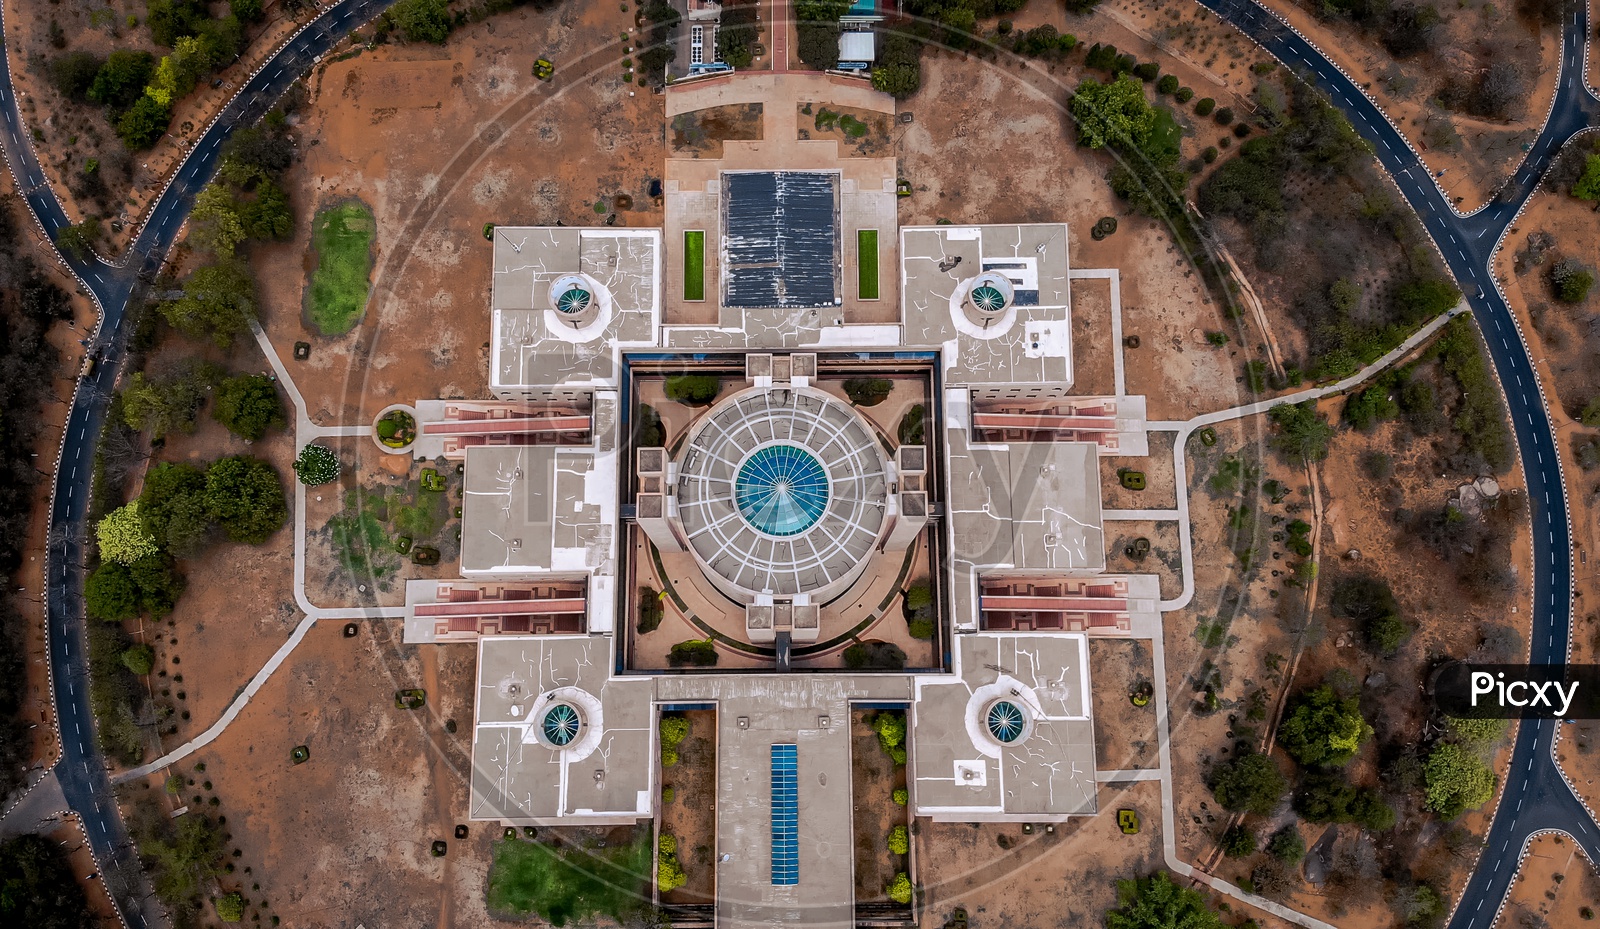 Top view of Indian school of business.